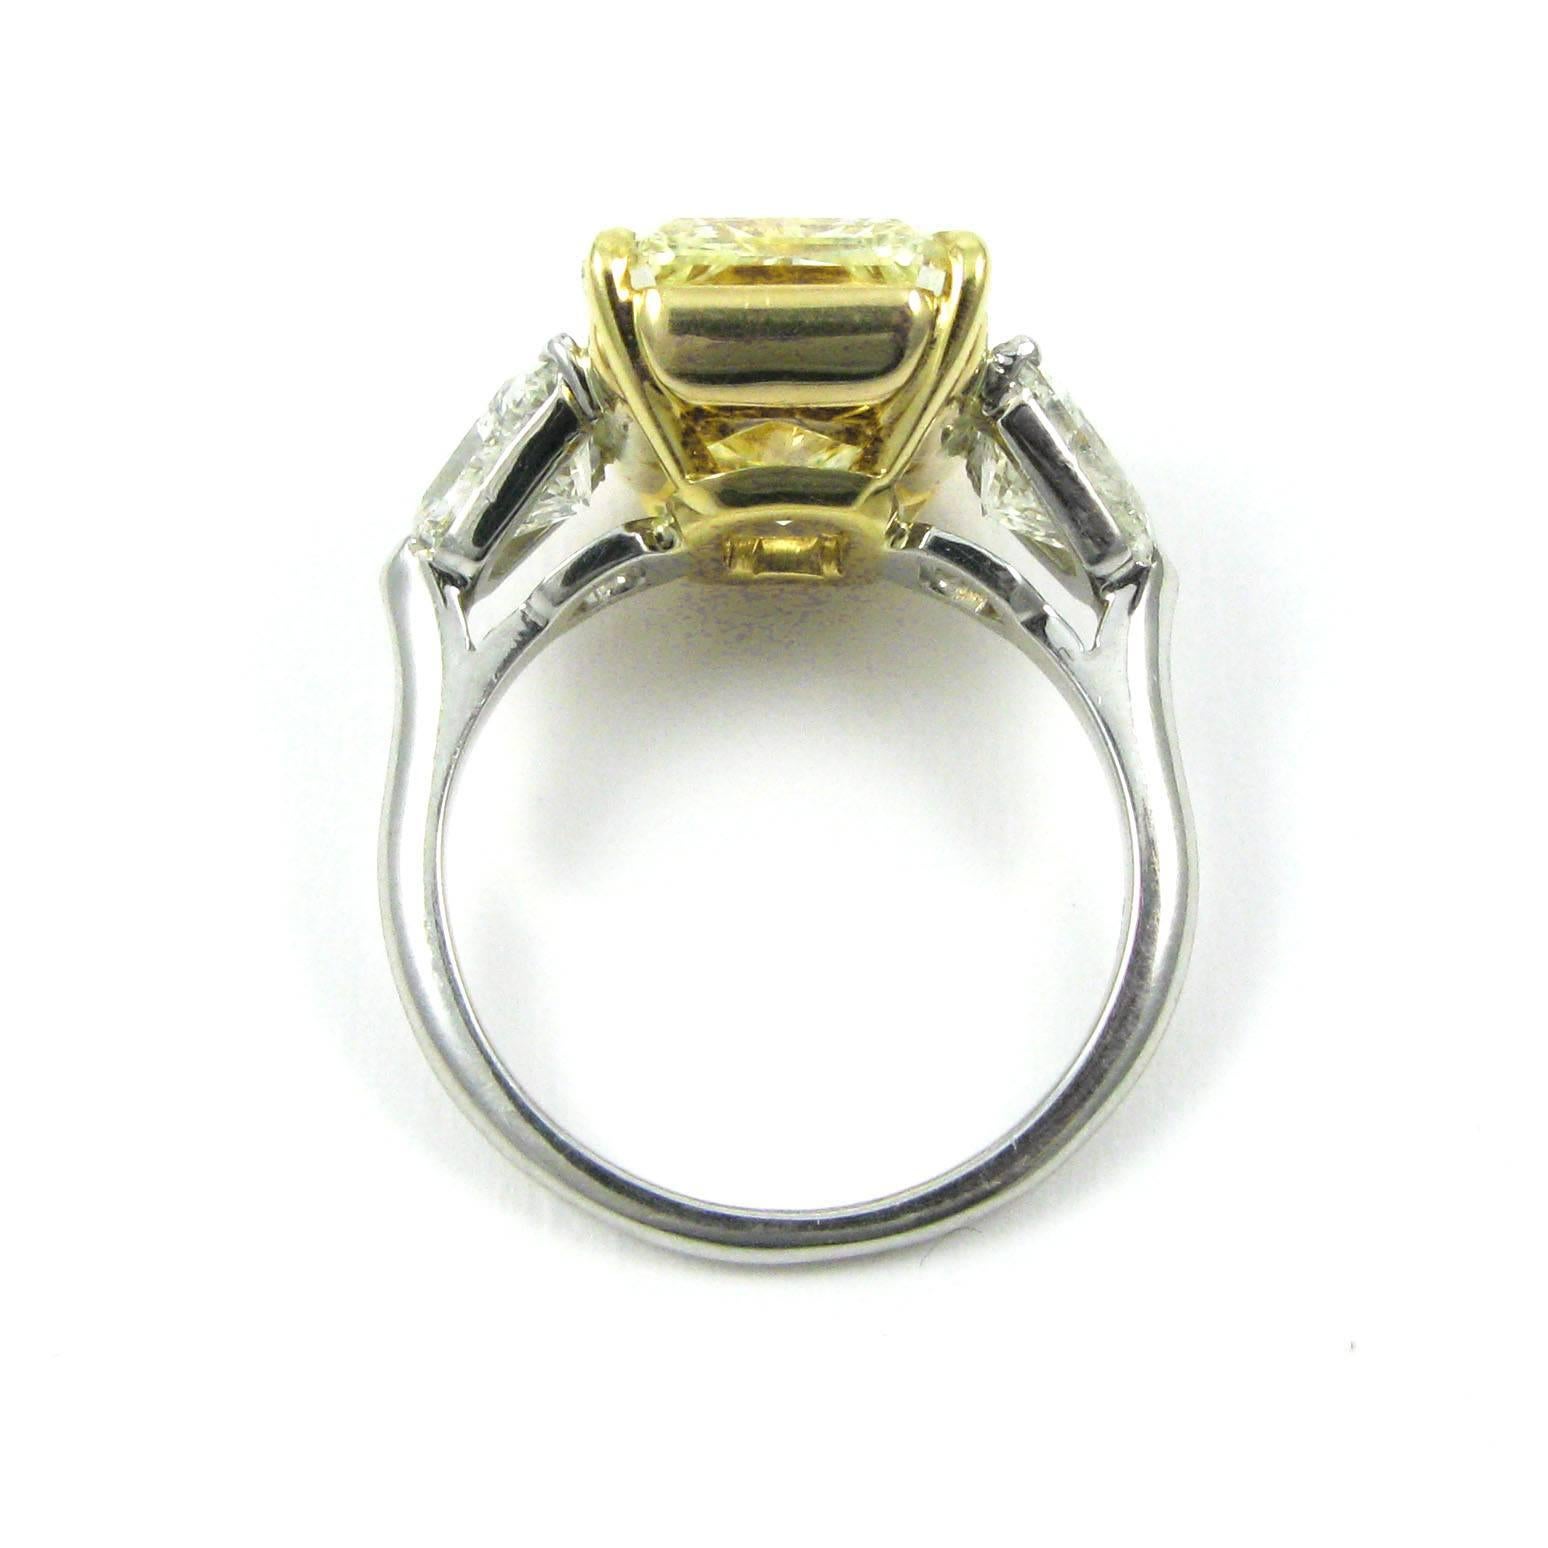 7.17 Carat Fancy Yellow Radiant Cut Diamond Ring GIA In Excellent Condition In New York, NY